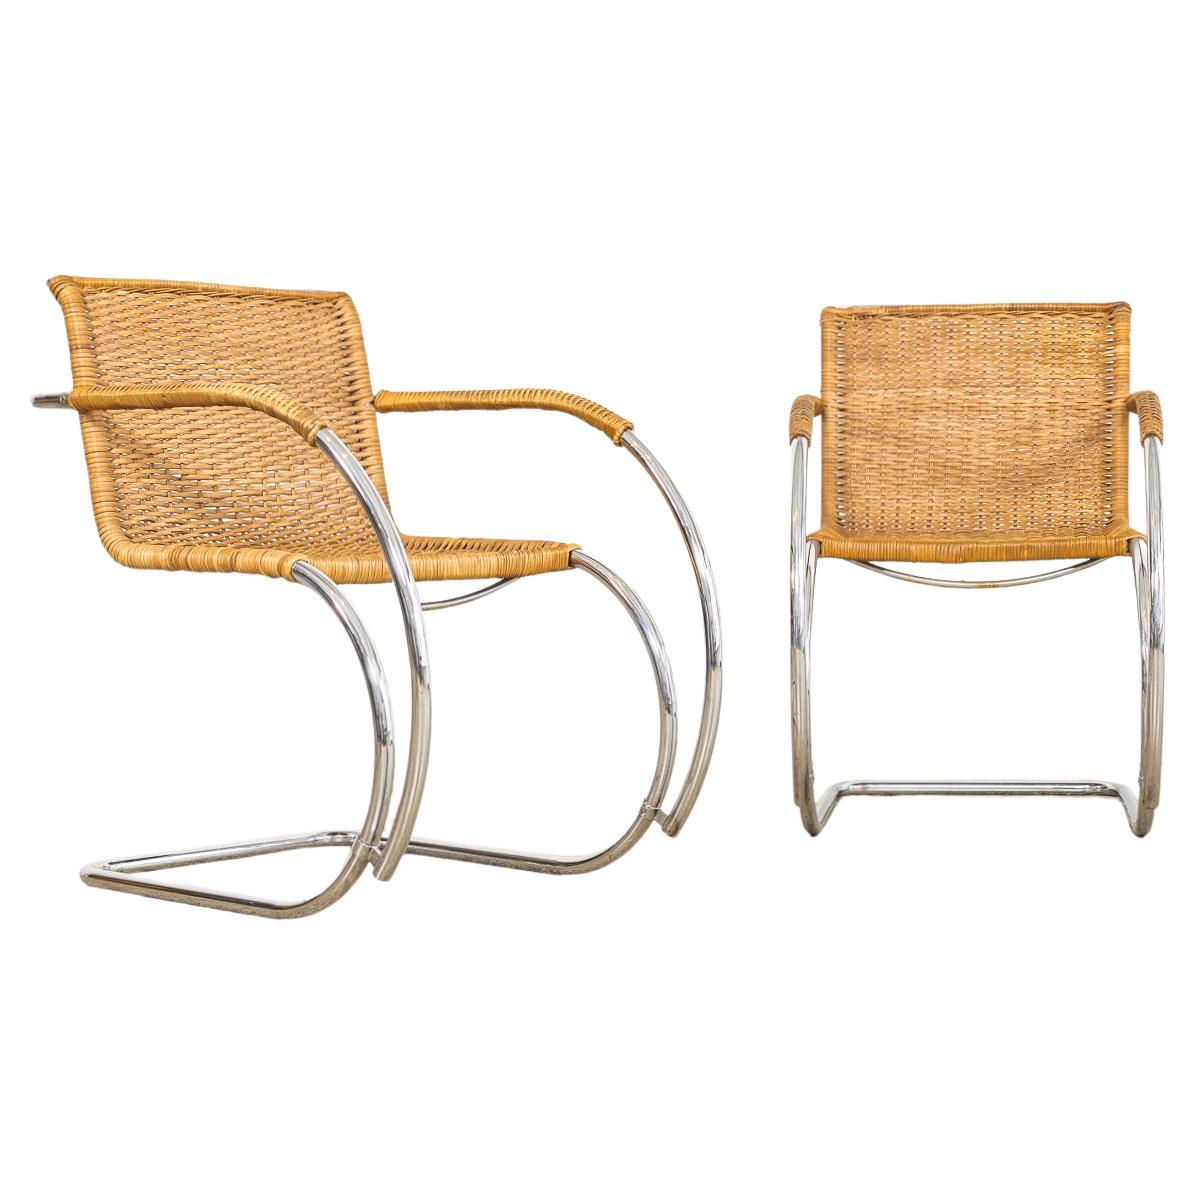 Bauhaus MR 20 Cantilever Arm Chairs by Mies Van Der Rohe for Stendig